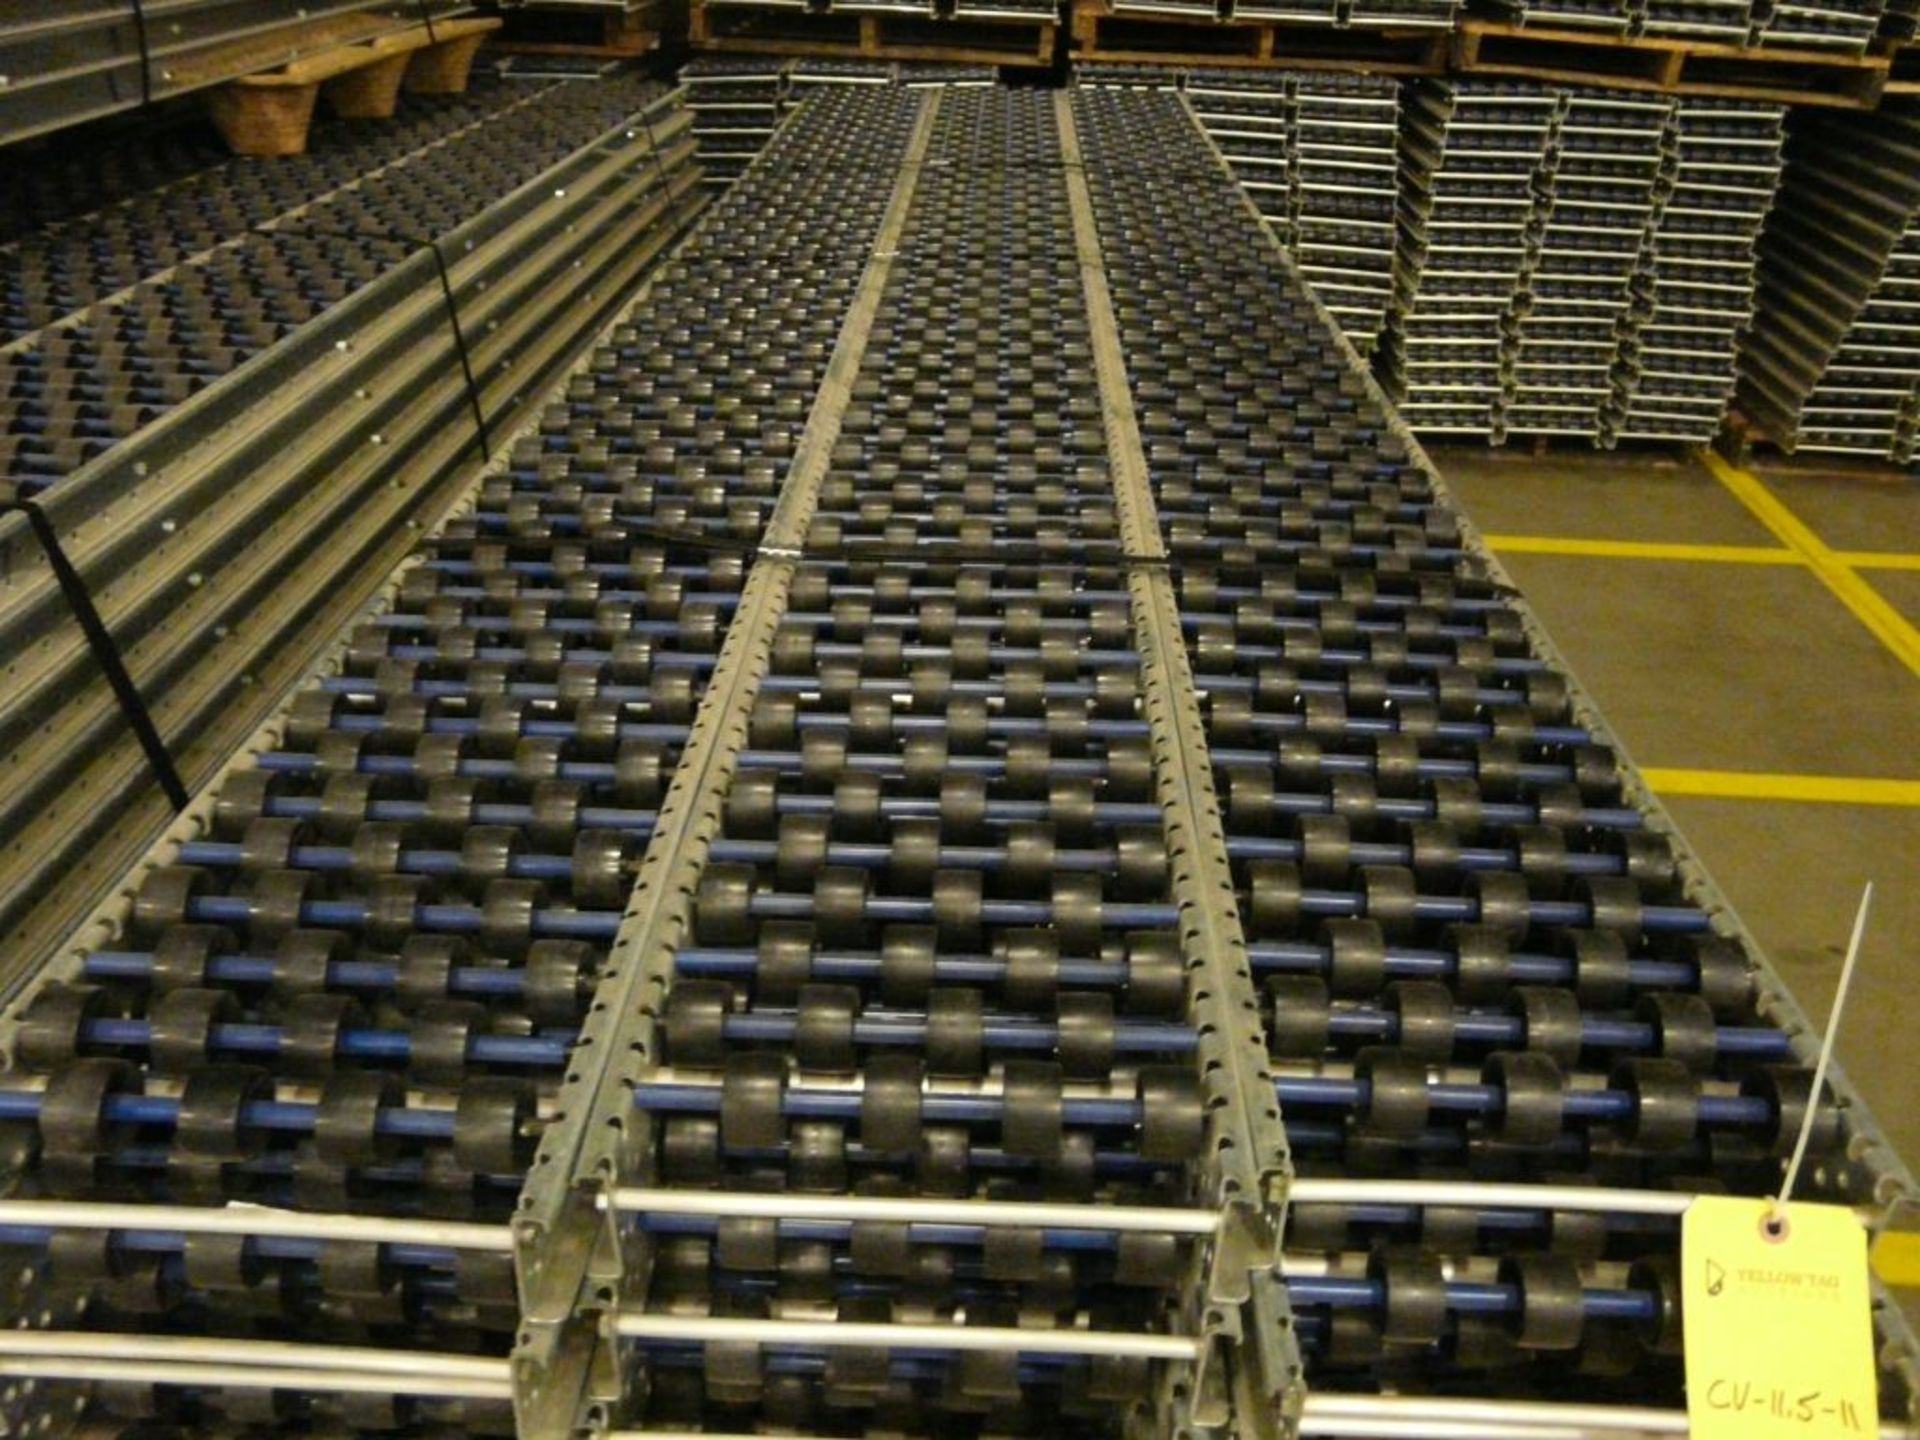 Lot of (90) SpanTrack Wheelbed Carton Flow Conveyors - 11.5'L x 11"W; Tag: 223557 - $30 Lot - Image 3 of 4